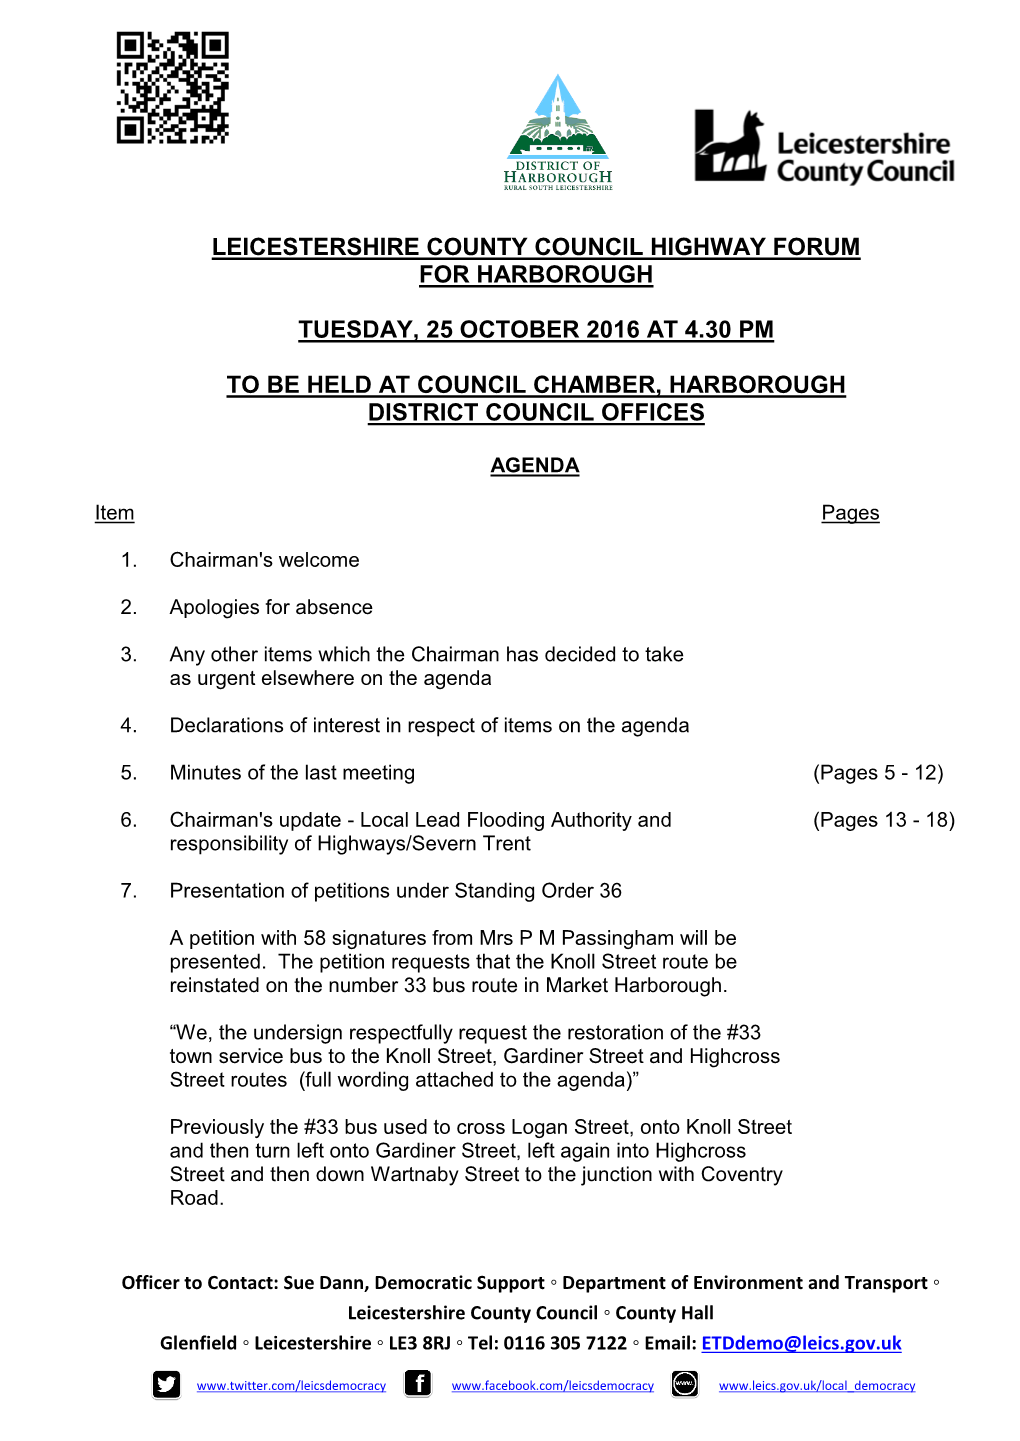 (Public Pack)Agenda Document for Leicestershire County Council